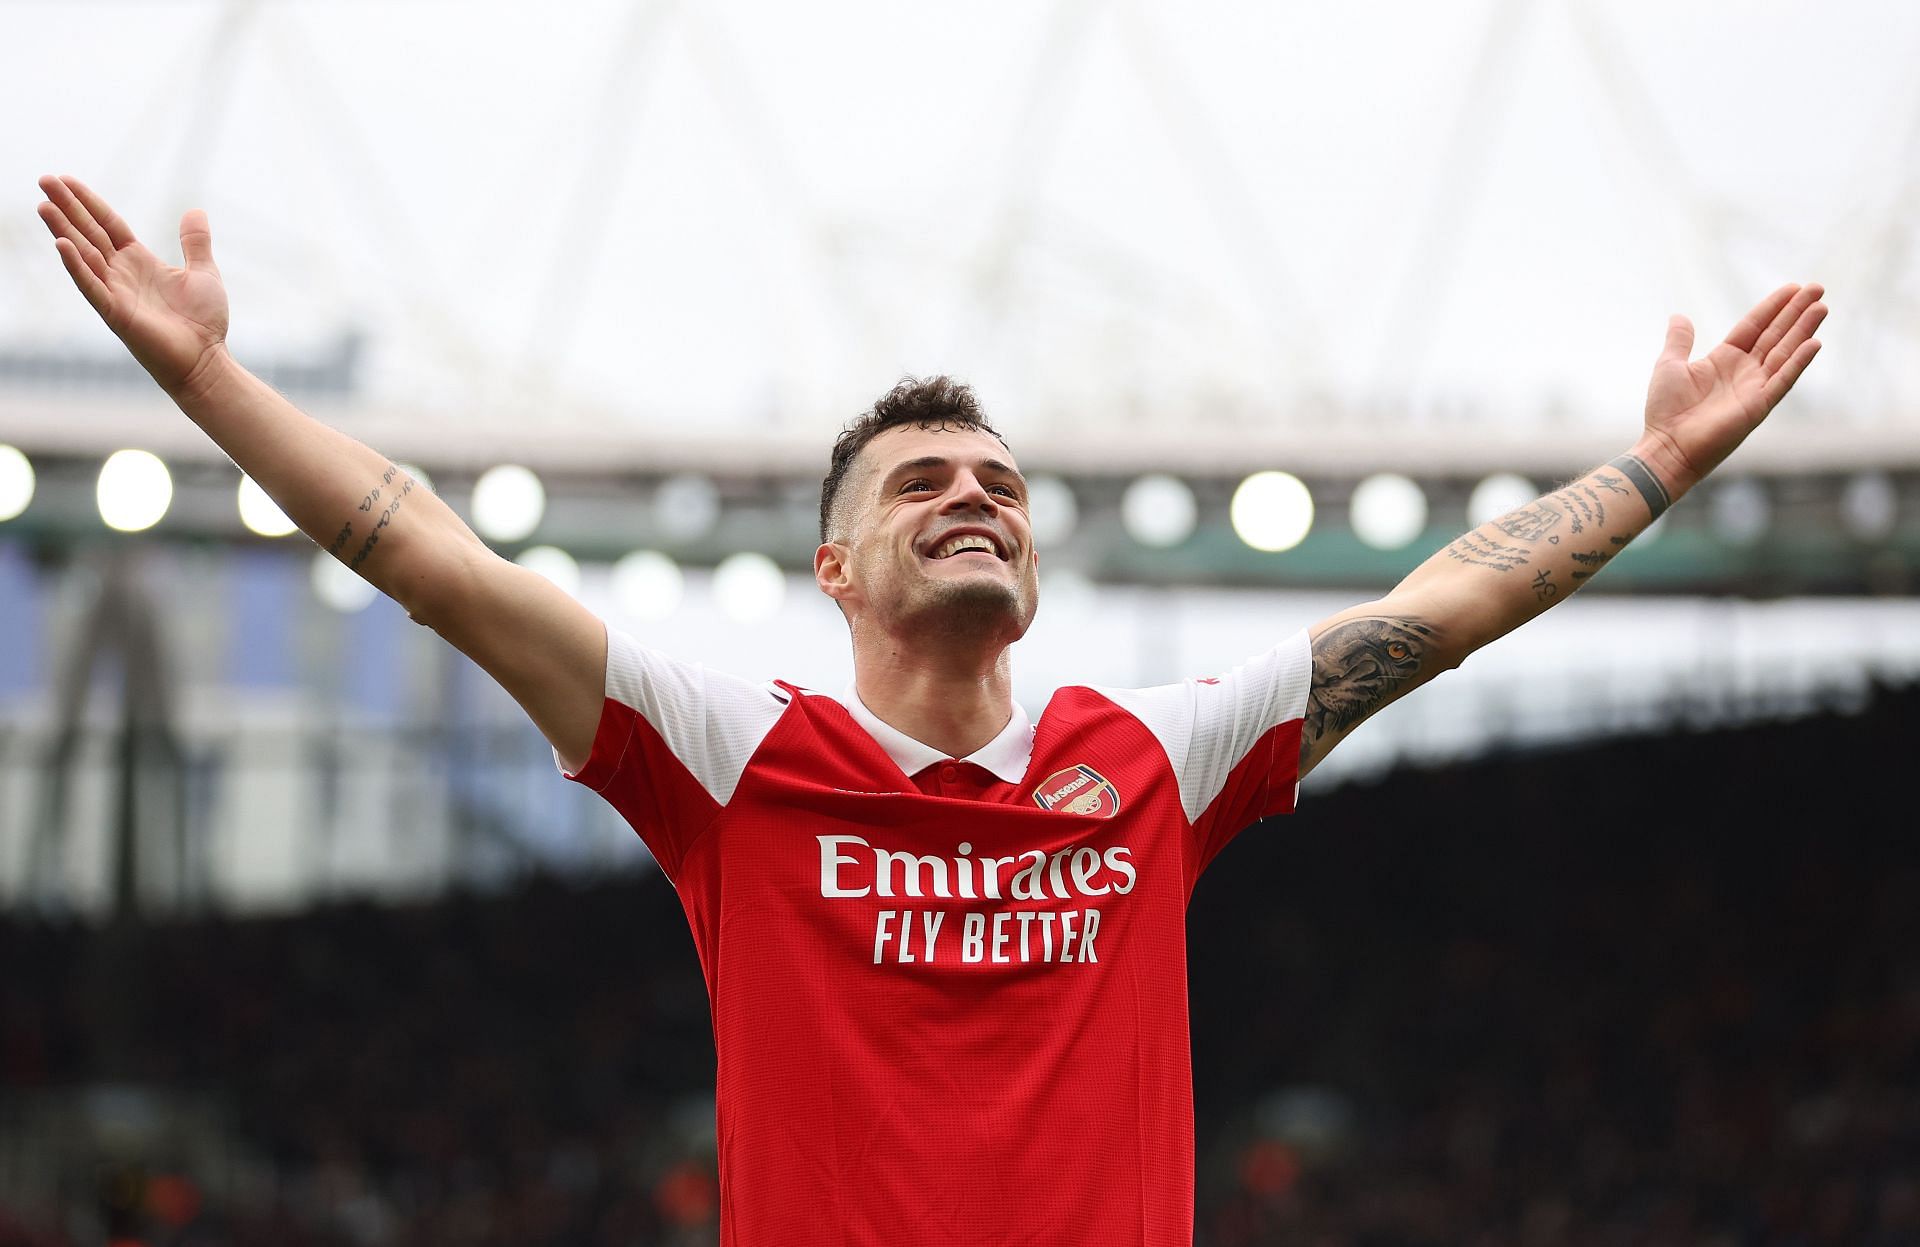 Granit Xhaka has received criticism for his antics against Liverpool.